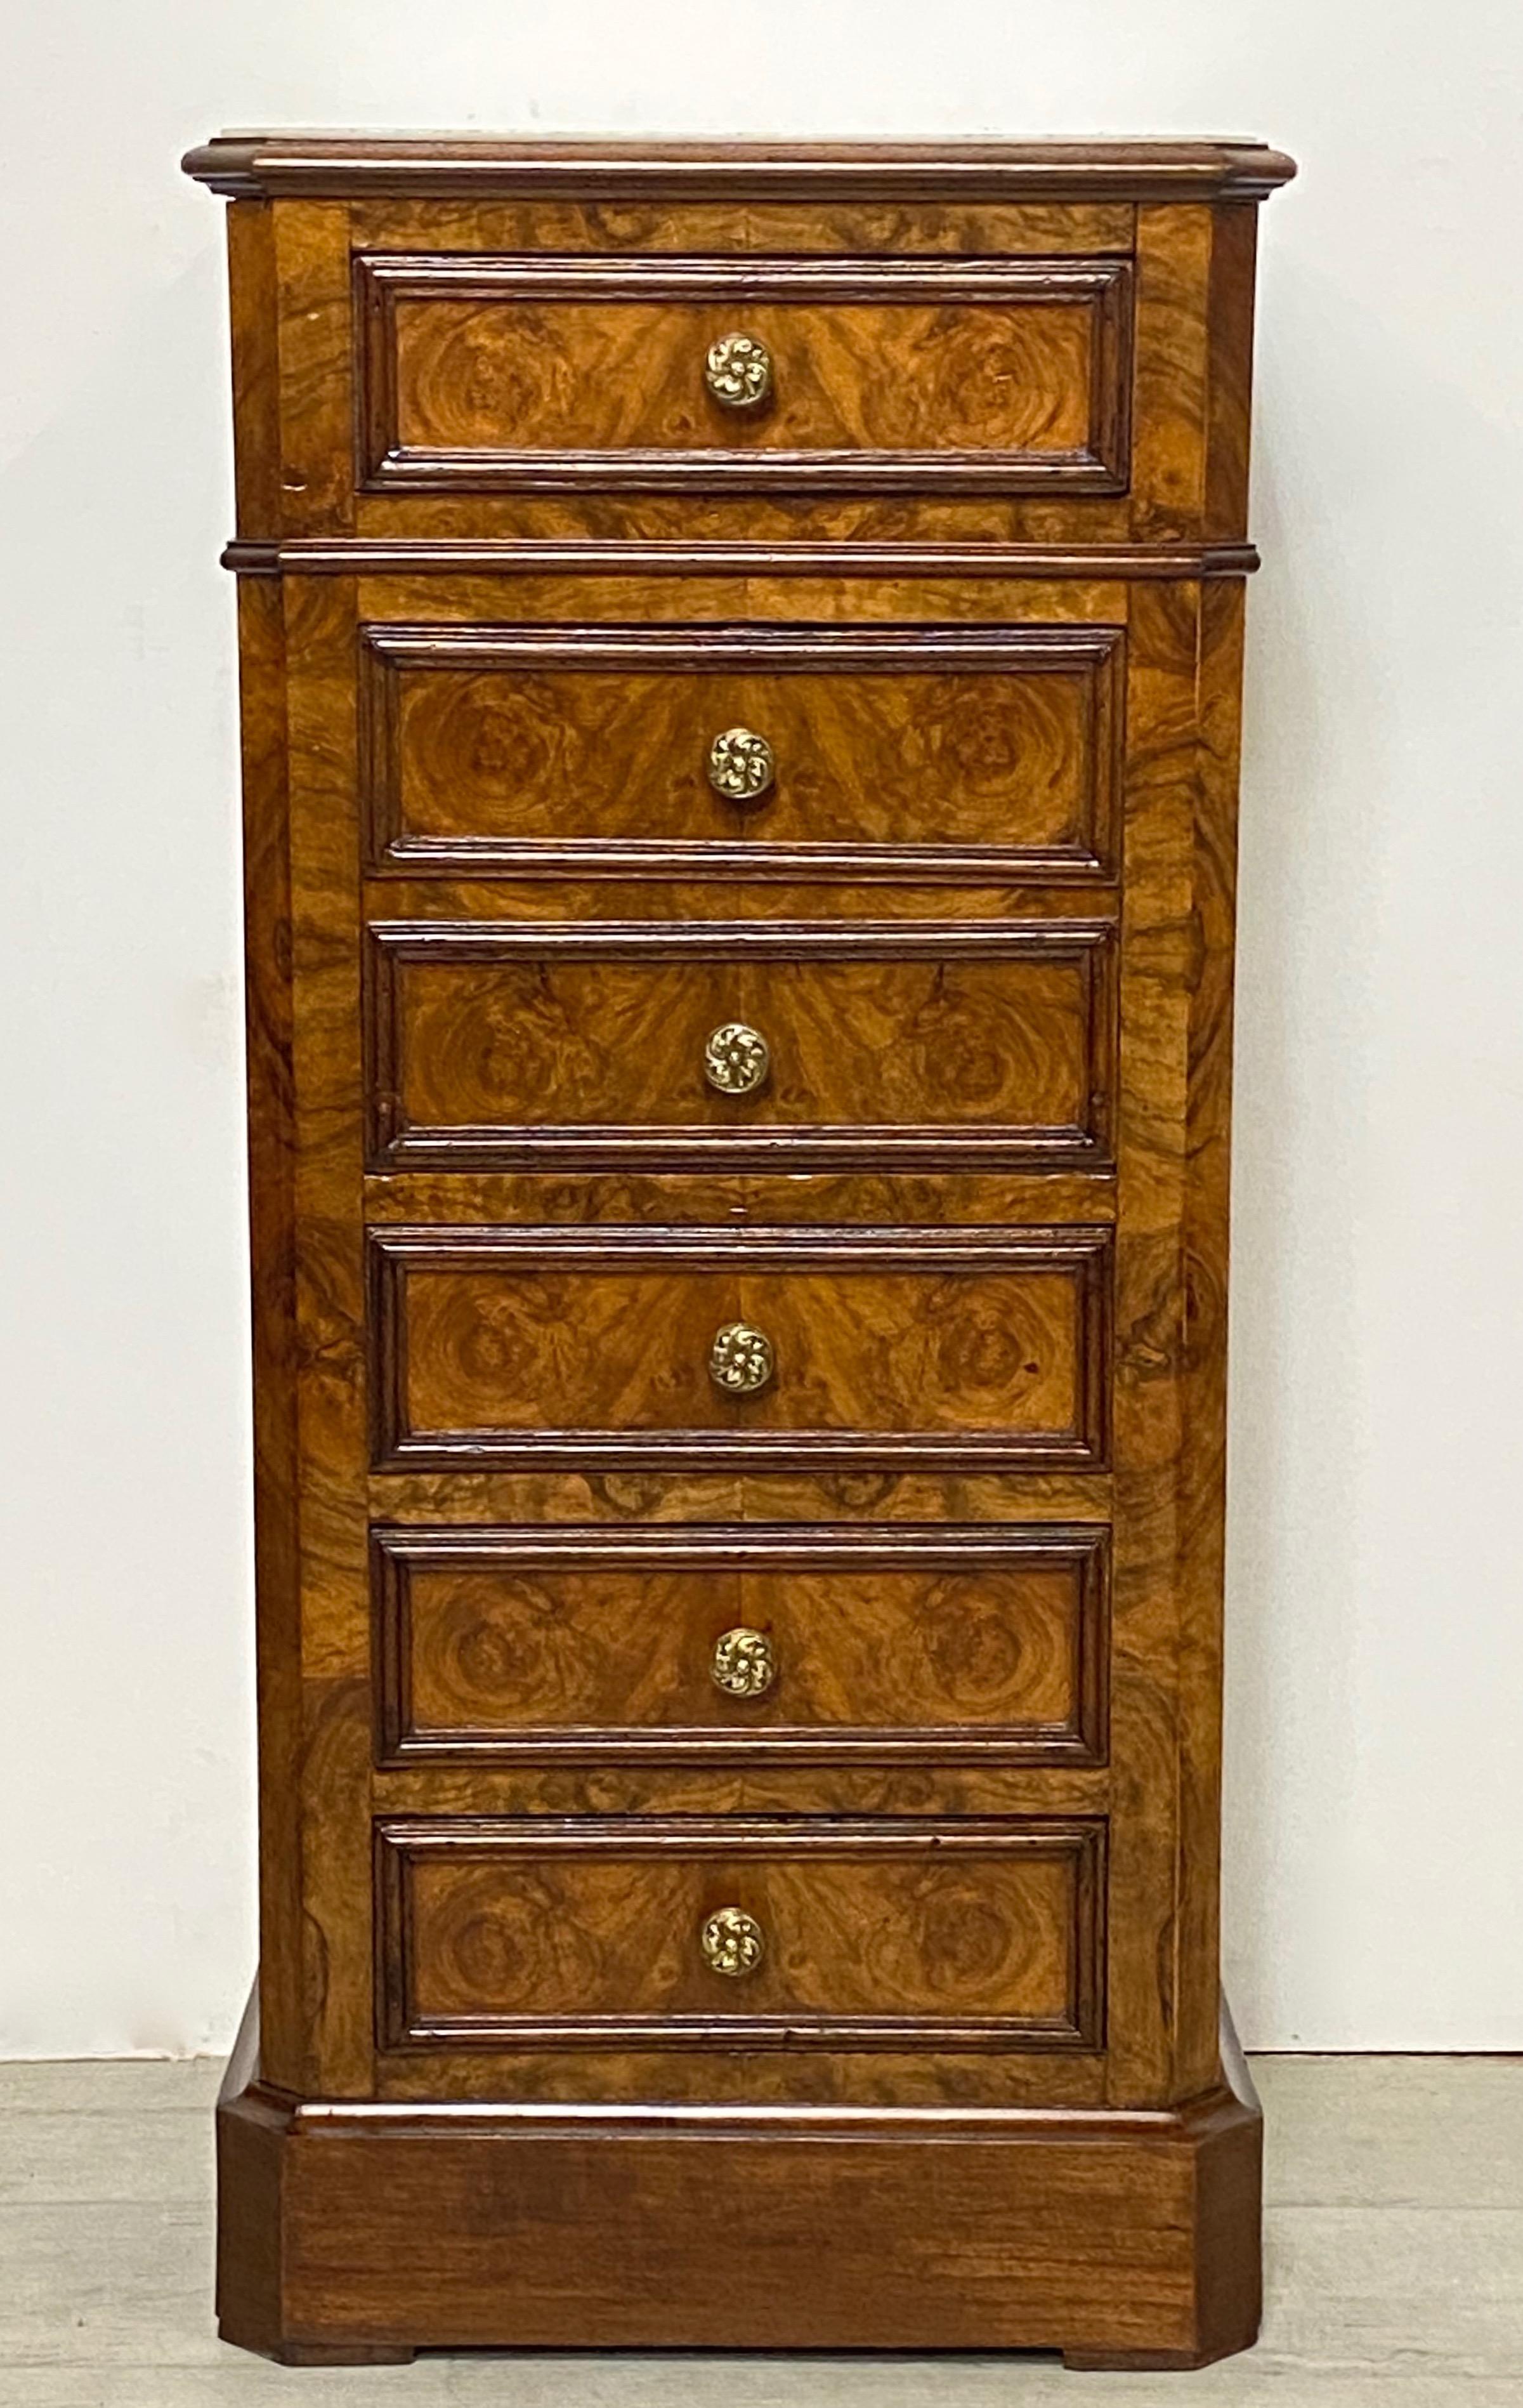 Highly figured walnut and black walnut bedside cabinet with inset marble top. Having four fabric lined drawers and one false front drawer that drops down to reveal a marble lined interior.
Excellent original condition, minor refreshment of